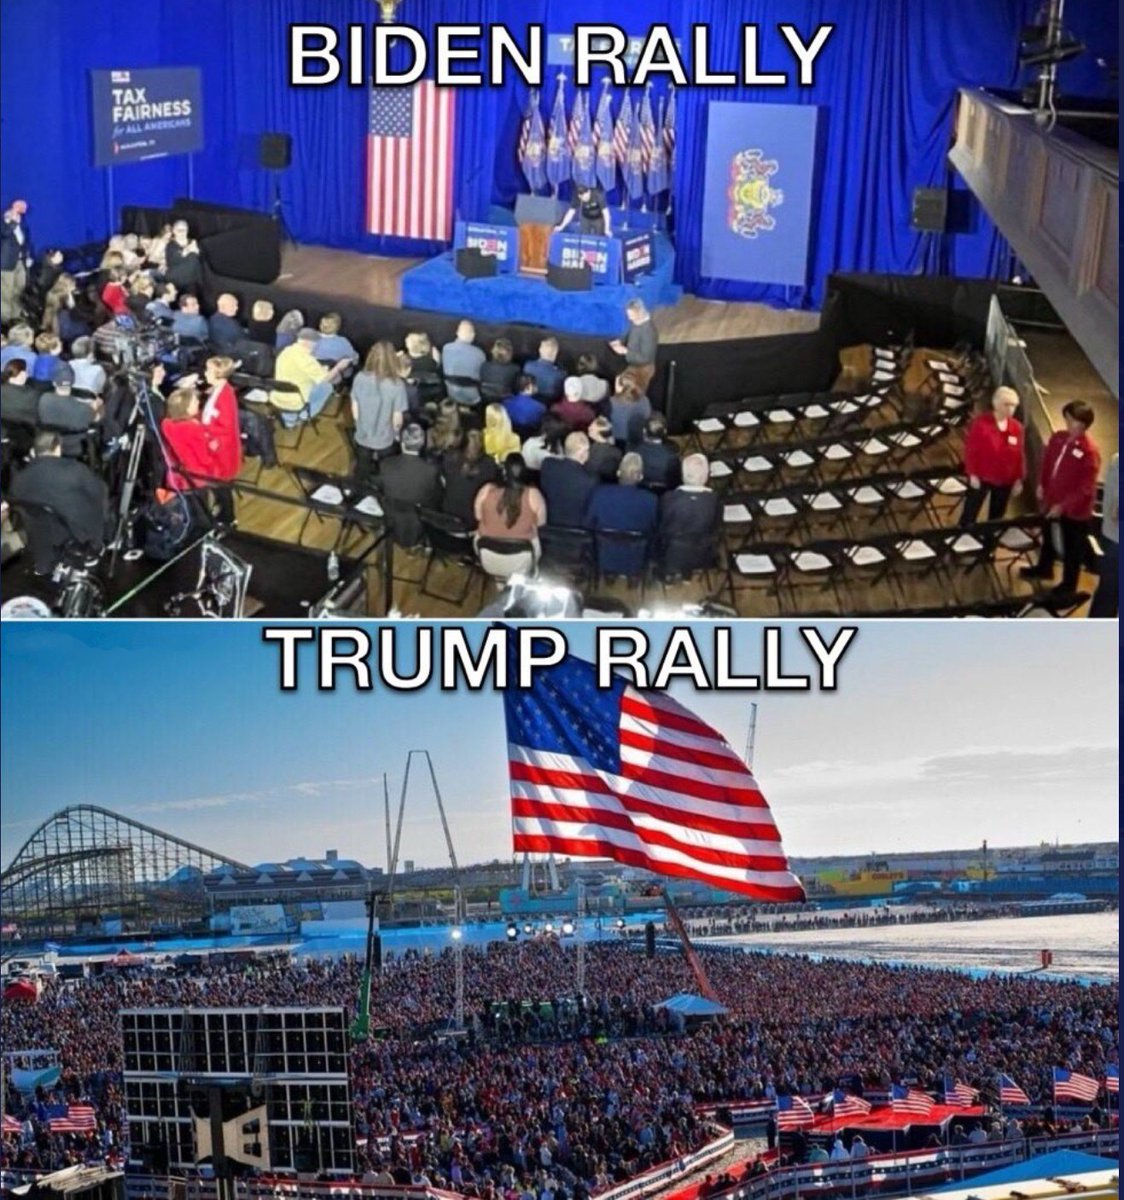 It's like Deja Vu. Except this time, every eye is watching & waiting for the left to try & cheat again. The world knows Biden did not get 81,000,000.